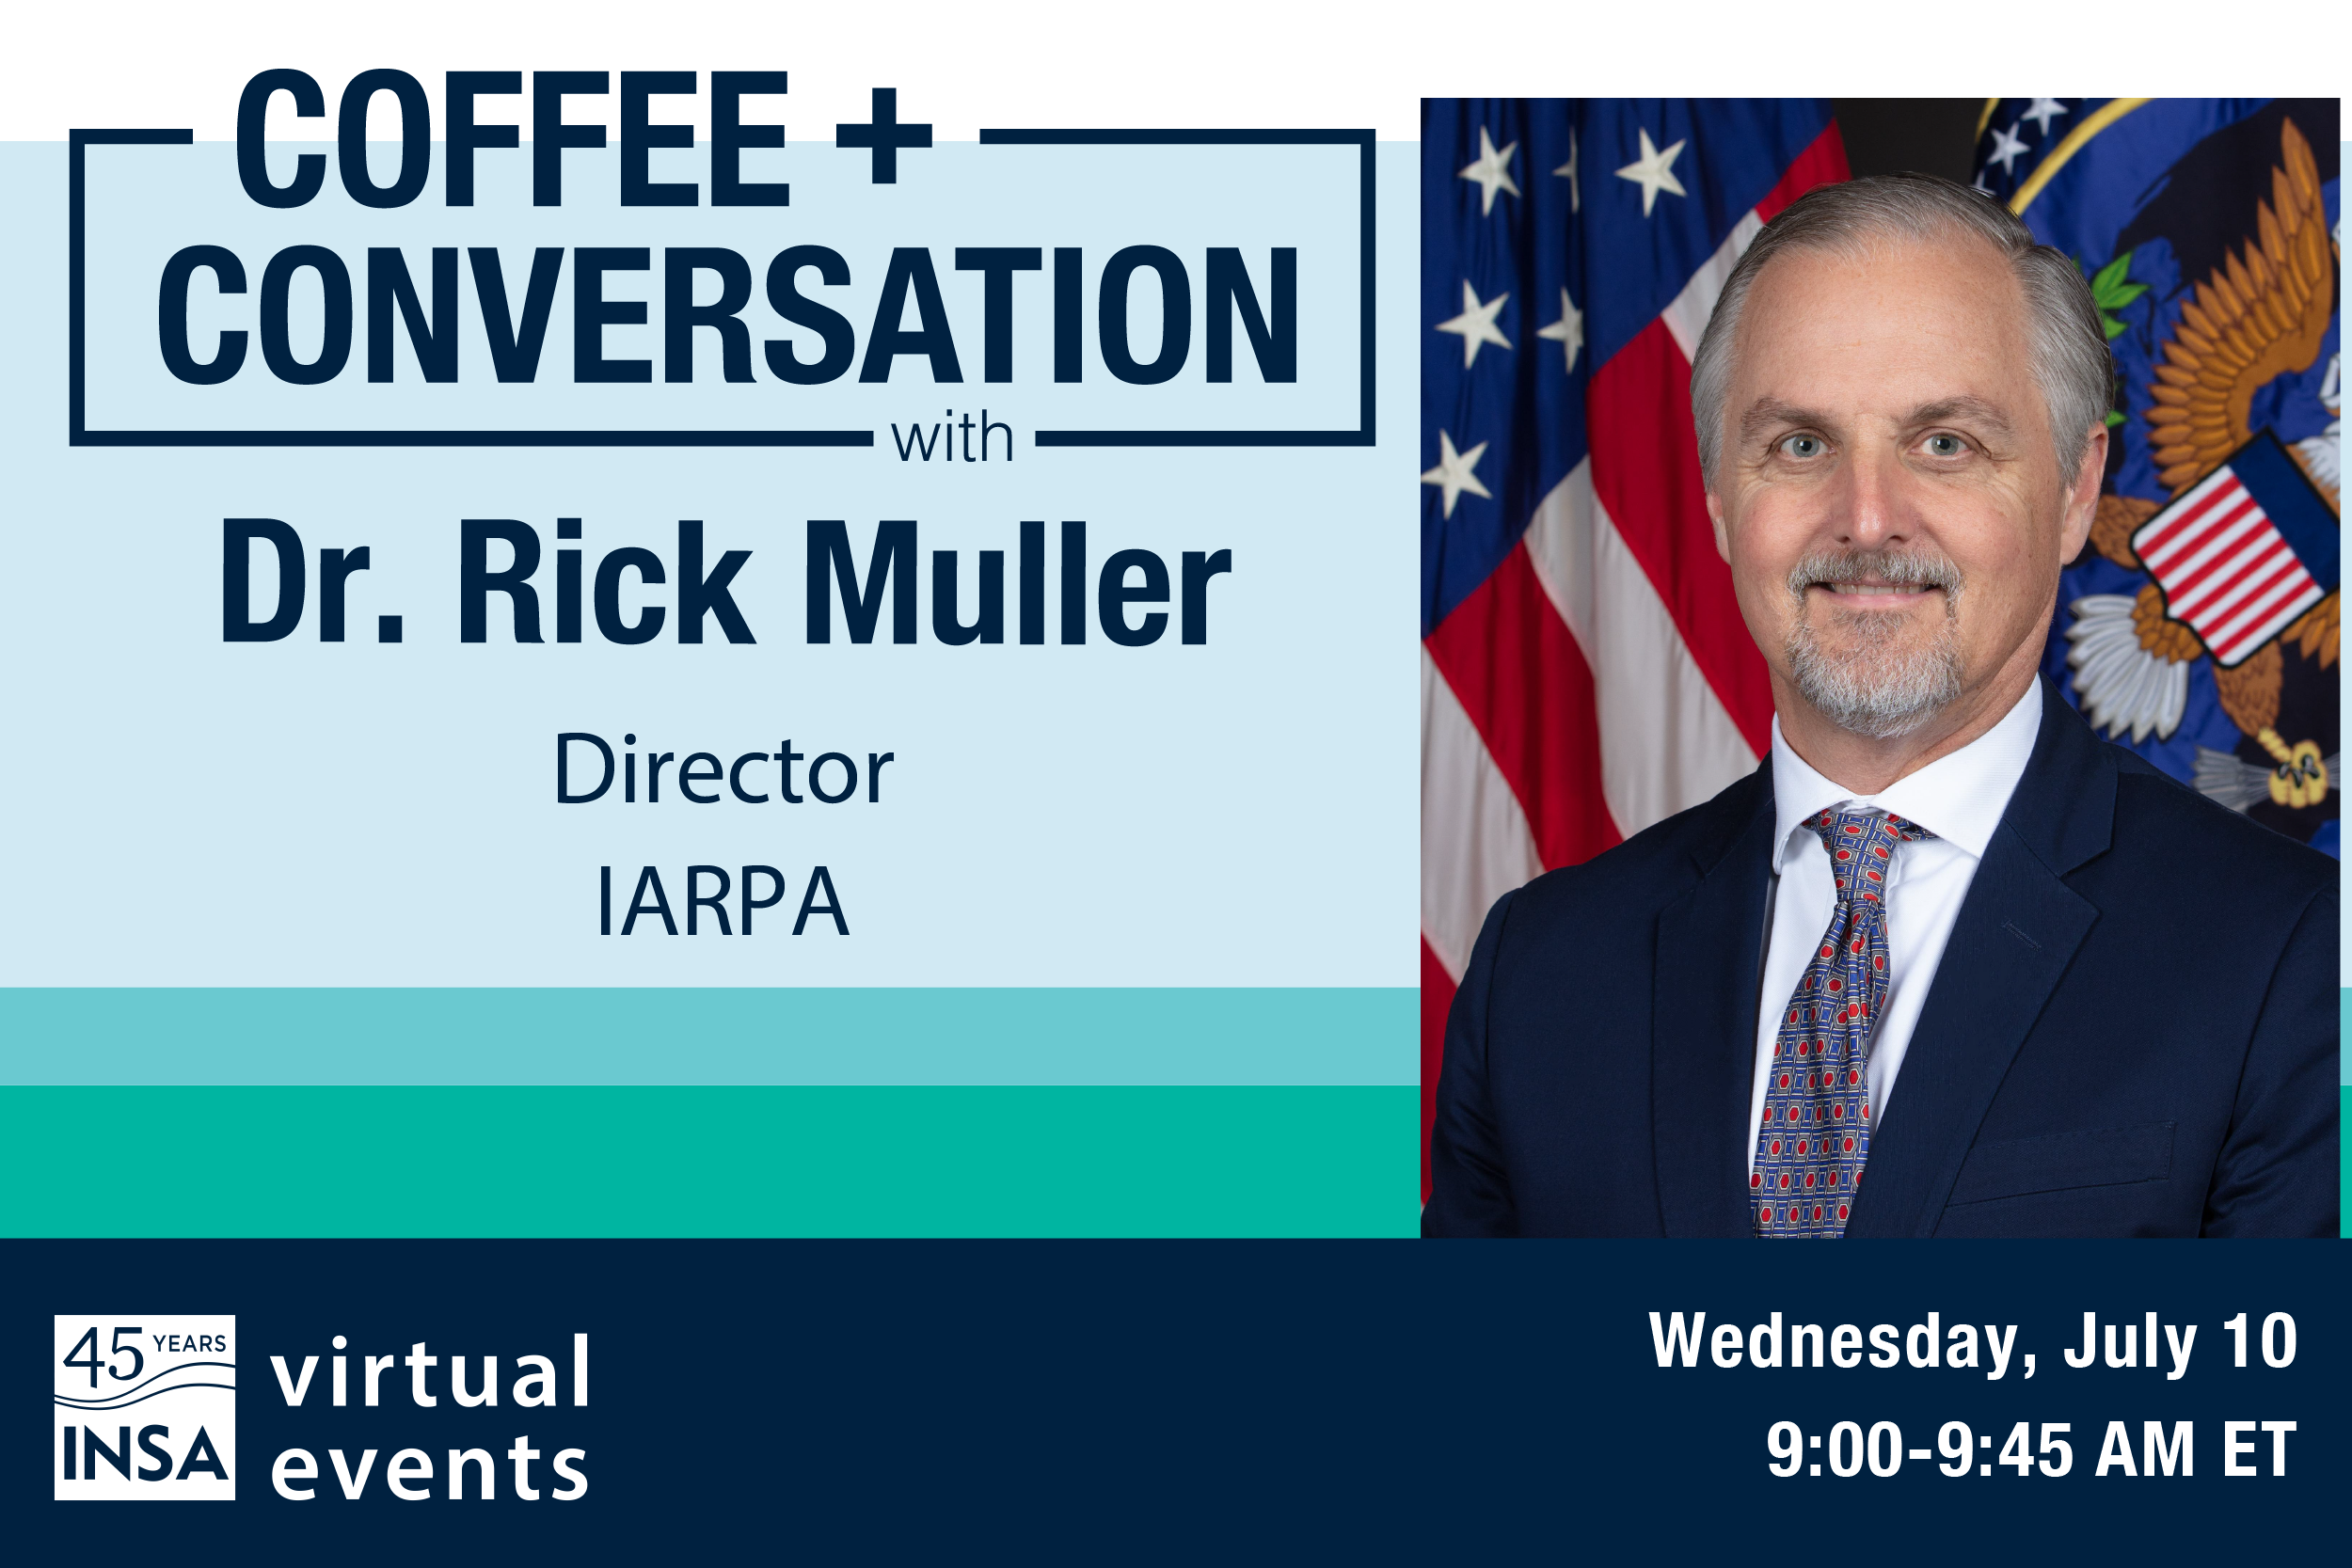 Virtual Coffee and Conversation with IARPA Director, Dr. Rick Muller